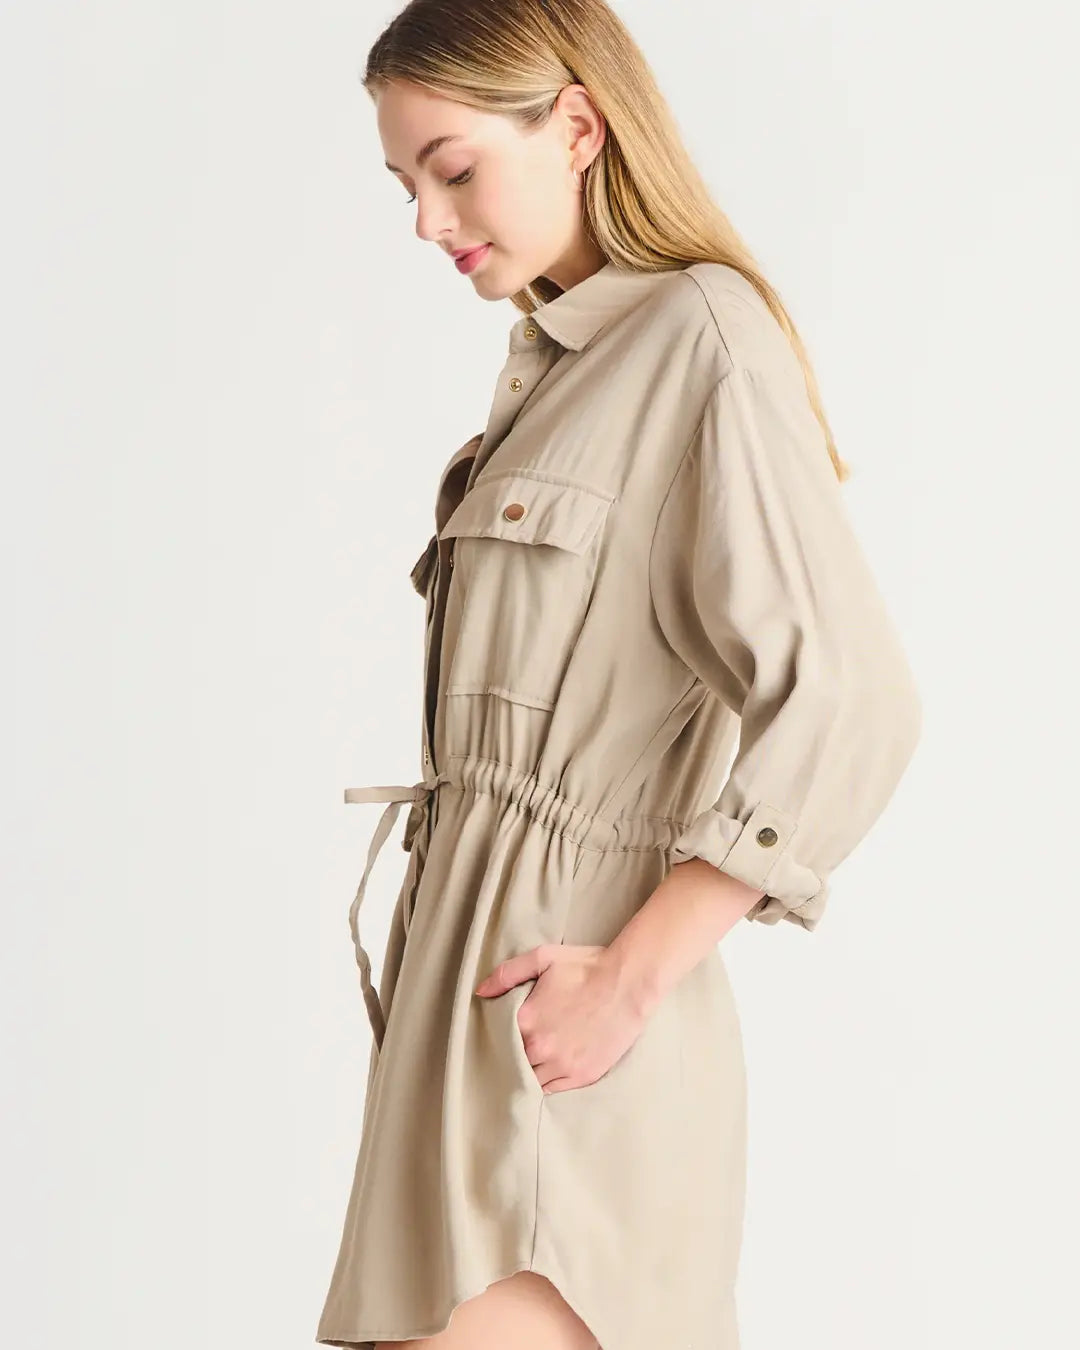 Comfy and cute? Yes, please! This button down utility dress with collar and drawstring waist is perfect for the cooler temps. You can even wear open as a jacket. The possibilities are endless!